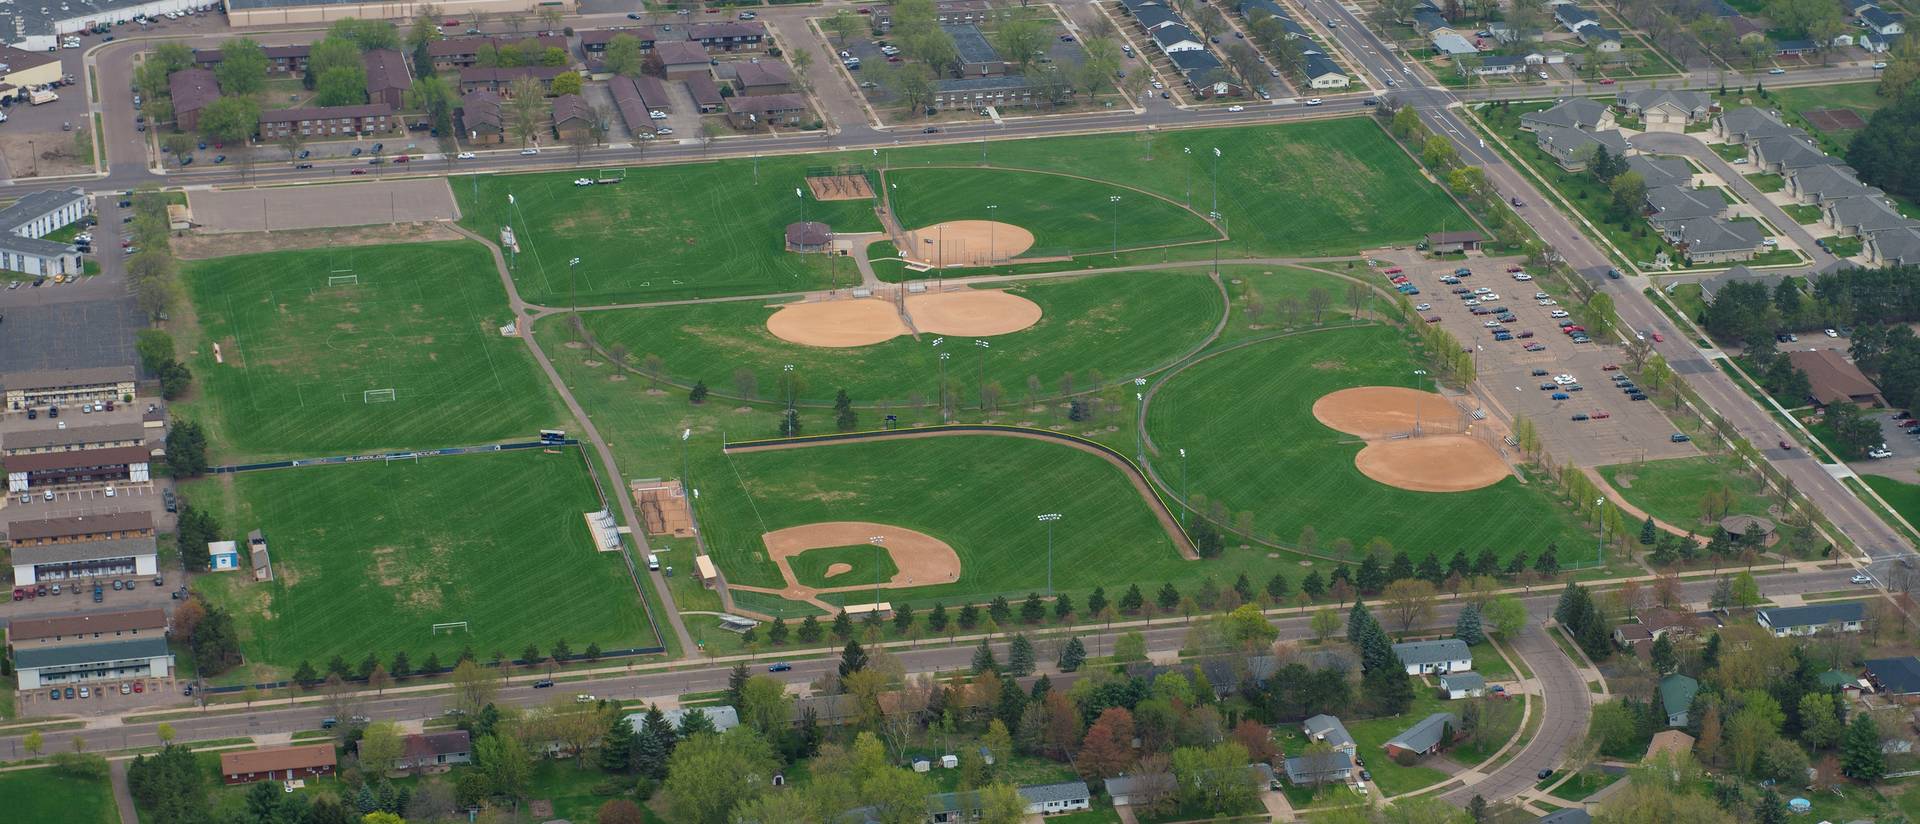 Aerial view of Bollinger Fields